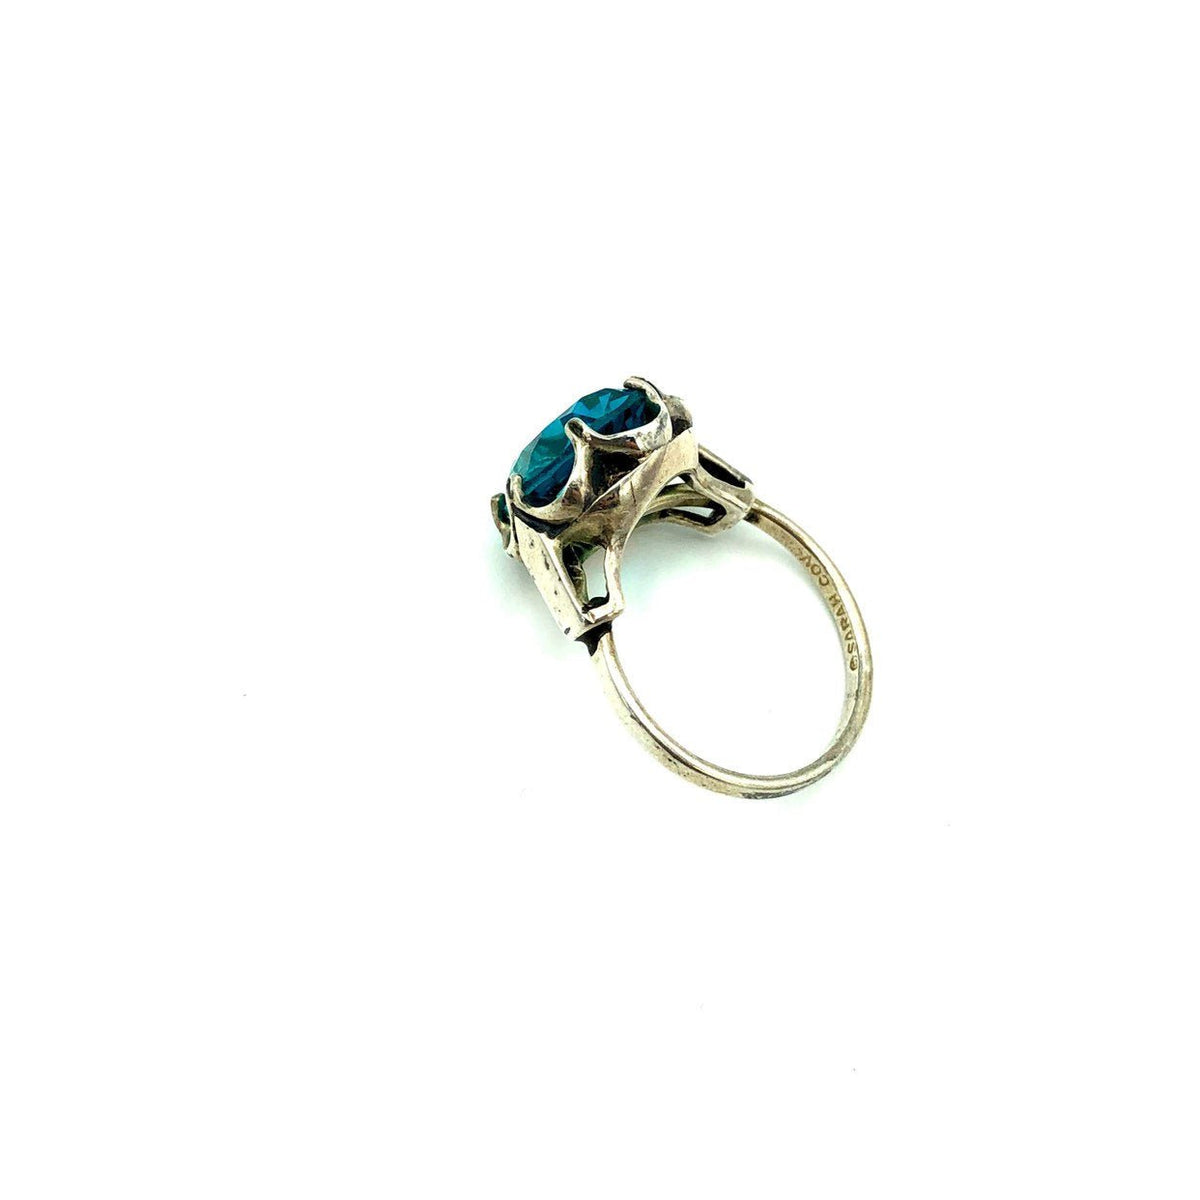 Sarah Coventry Bright Blue Rhinestone Sterling Solitaire Vintage Ring - 24 Wishes Vintage Jewelry